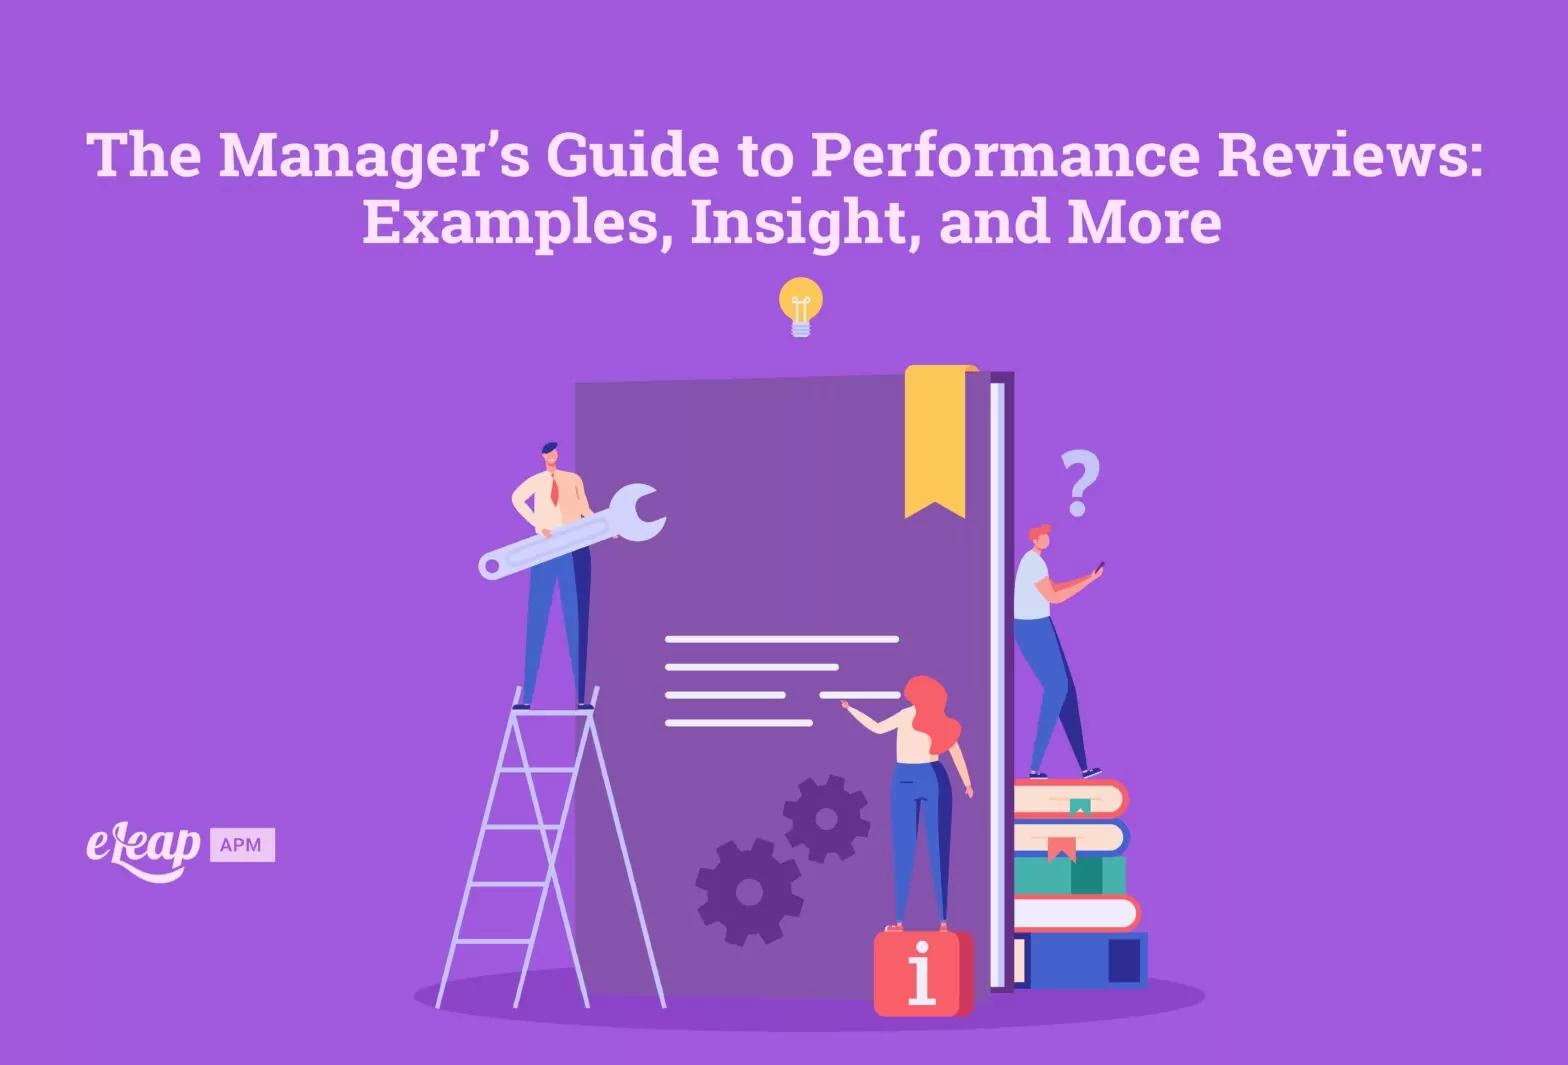 The Manager’s Guide to Performance Reviews: Examples, Insight, and More